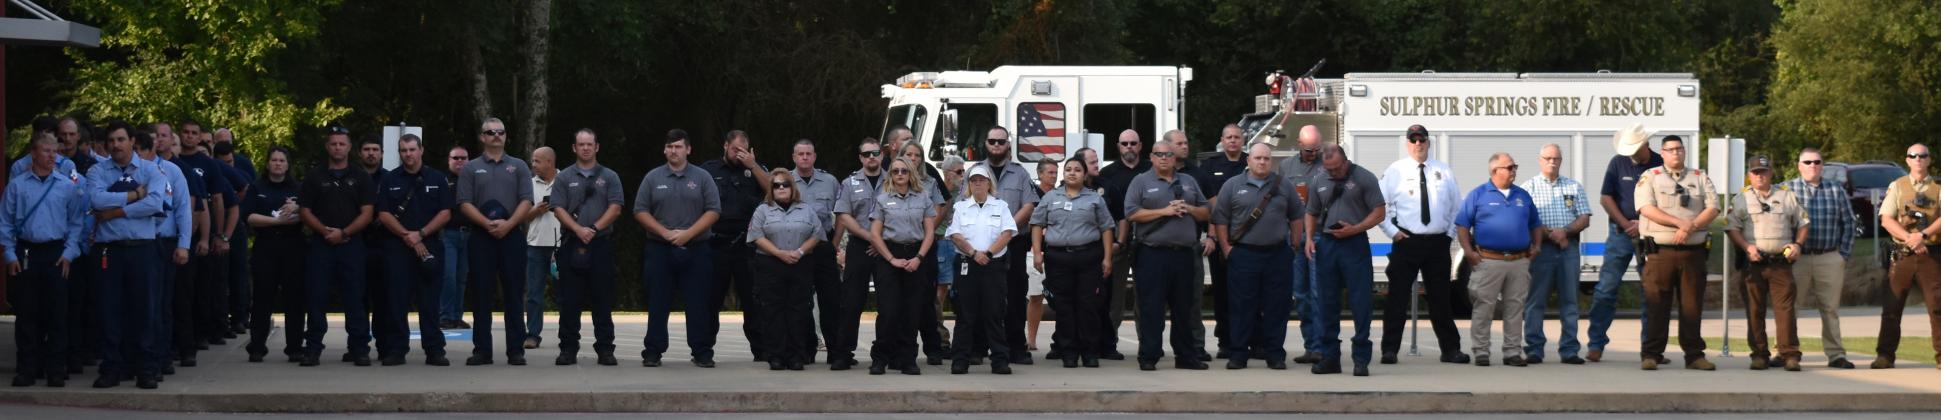 County first responders watch the 9/11 ceremony.